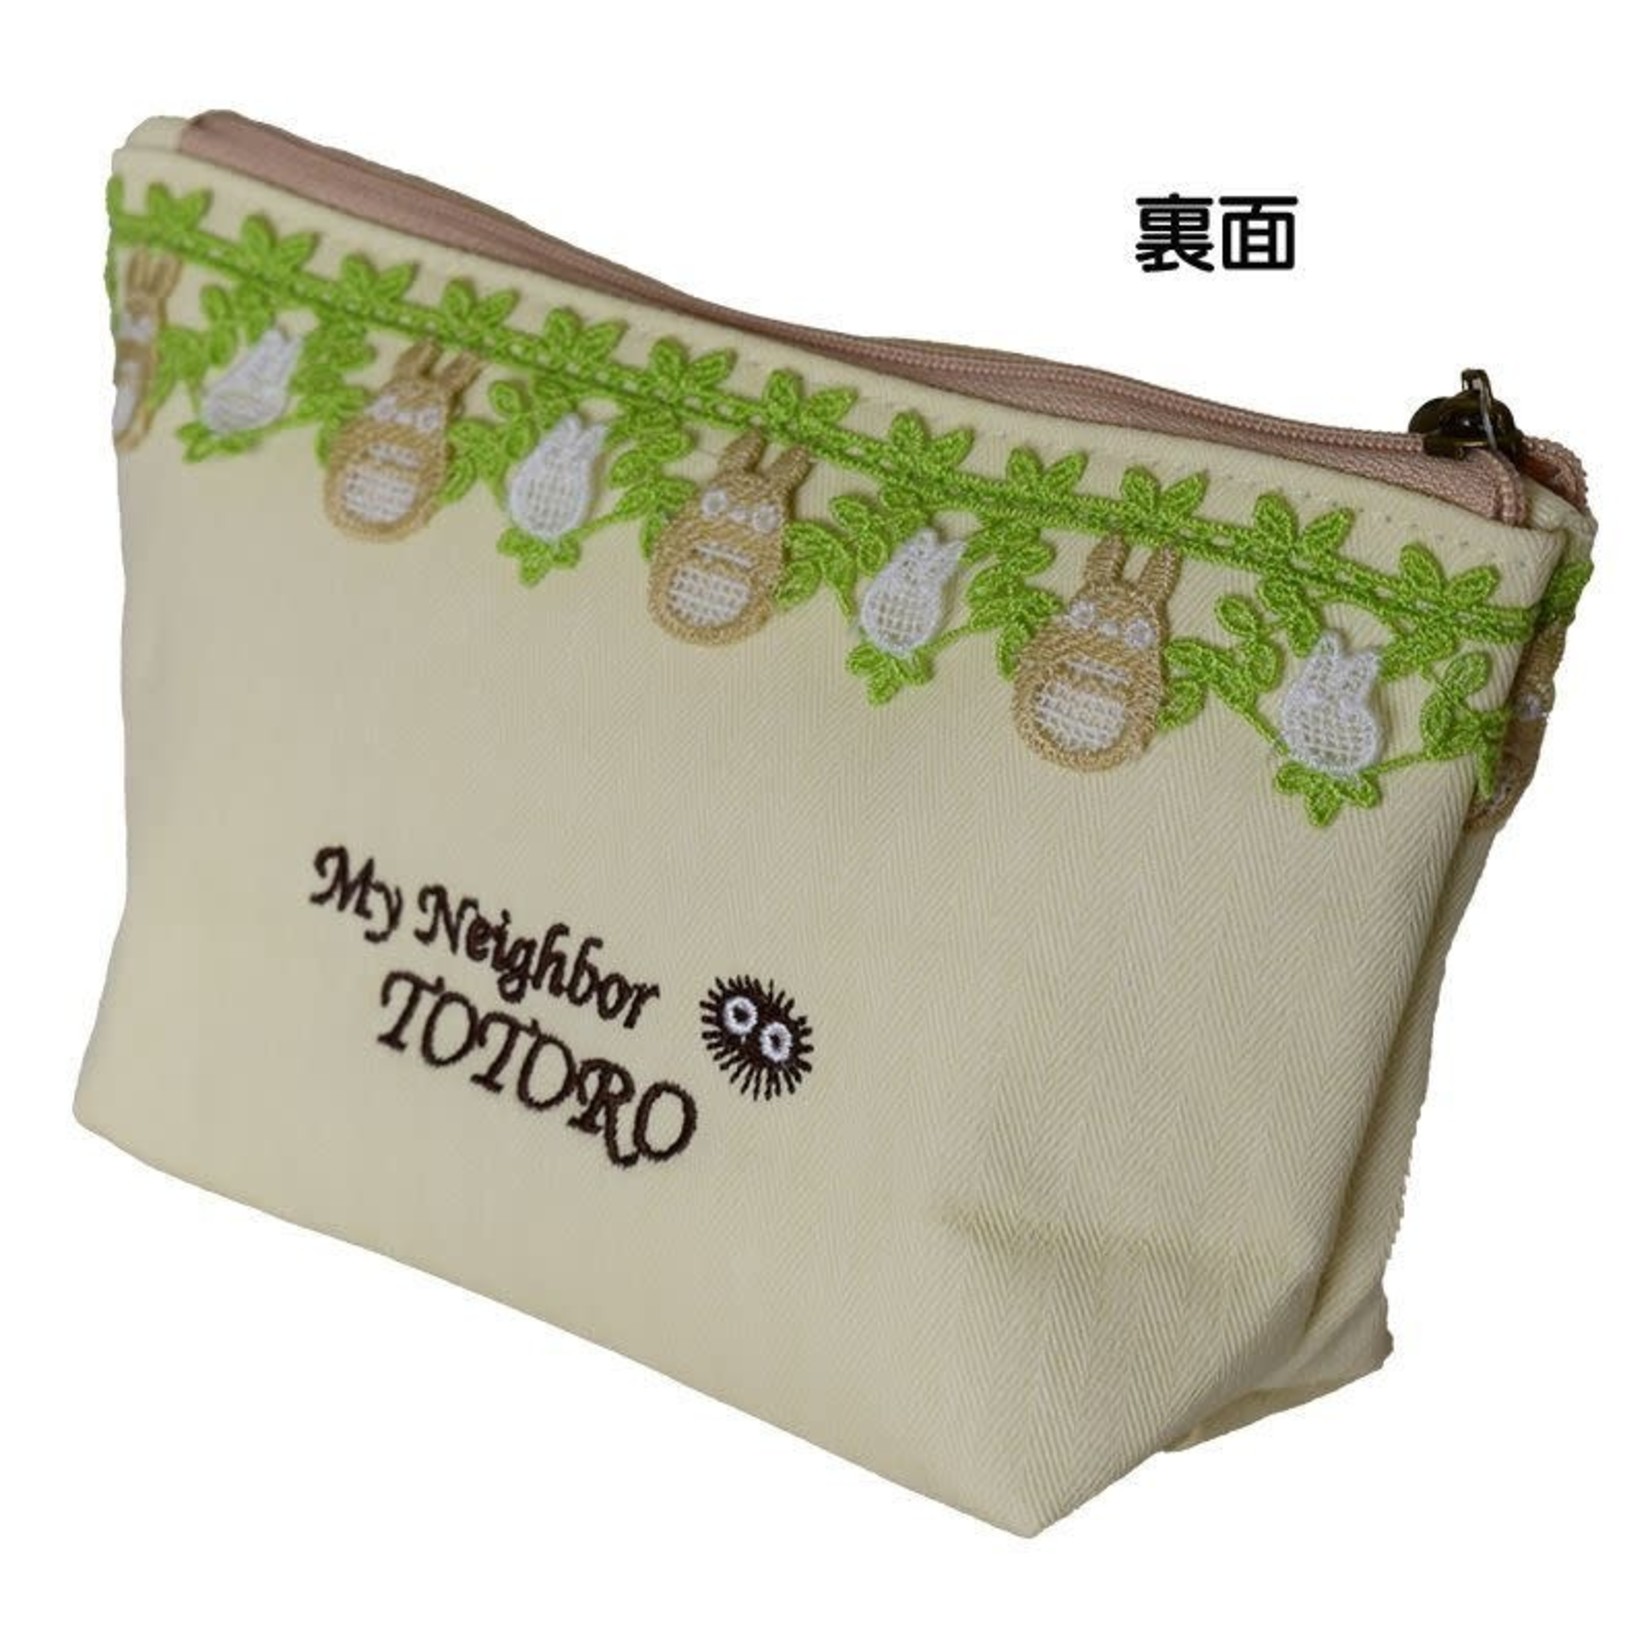 Totoro - Lace Pouch - 1165034700